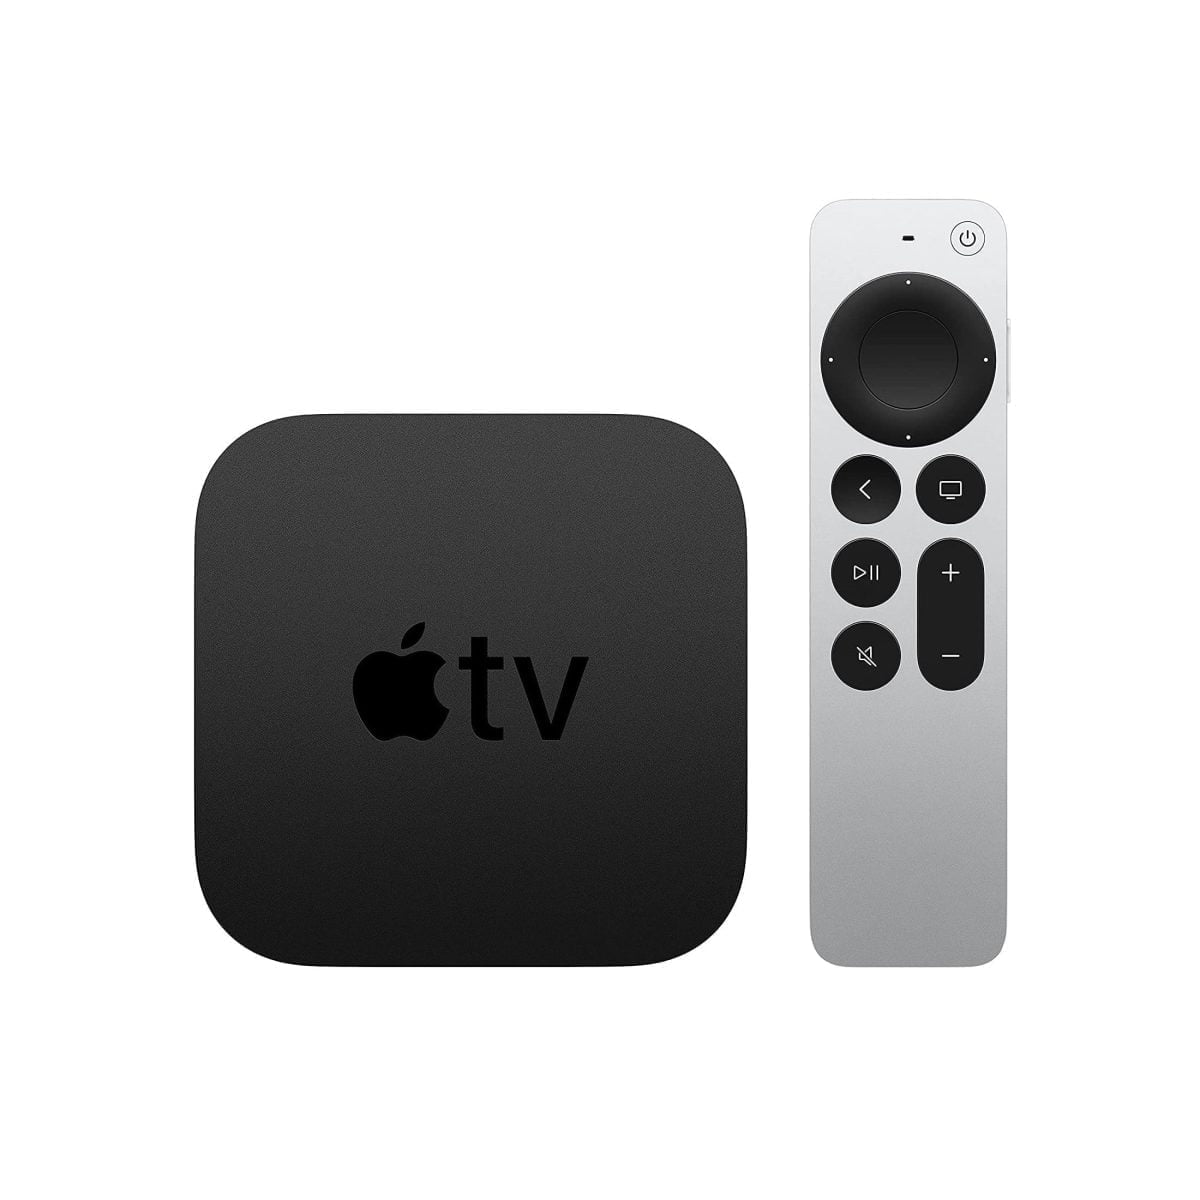 815G8Uo656S. Ac Sl1500 1 Apple &Amp;Lt;H1&Amp;Gt;Apple Tv 4K - 64Gb 2Nd Generation Latest Model Mxh02&Amp;Lt;/H1&Amp;Gt; The New Apple Tv 4K Brings The Best Shows, Movies, Sports, And Live Tv Together With Your Favorite Apple Devices And Services. Now With 4K High Frame Rate Hdr For Fluid, Crisp Video. Watch Apple Originals With Apple Tv+. Experience More Ways To Enjoy Your Tv With Apple Arcade, Apple Fitness+, And Apple Music. And Use The New Siri Remote With A Touch-Enabled Clickpad To Control It All. Take Entertainment To Next Level By Bringing Home The Next-Generation Apple Tv 4K With 64 Gb Storage, A Higher Definition Of Tv. The Best Of Tv Together With Your Favorite Apple Devices And Services Will Transform Your Living Room And Elevate Your Entertainment. Apple Tv Apple Tv 4K - 64Gb 2Nd Generation Latest Model Mxh02